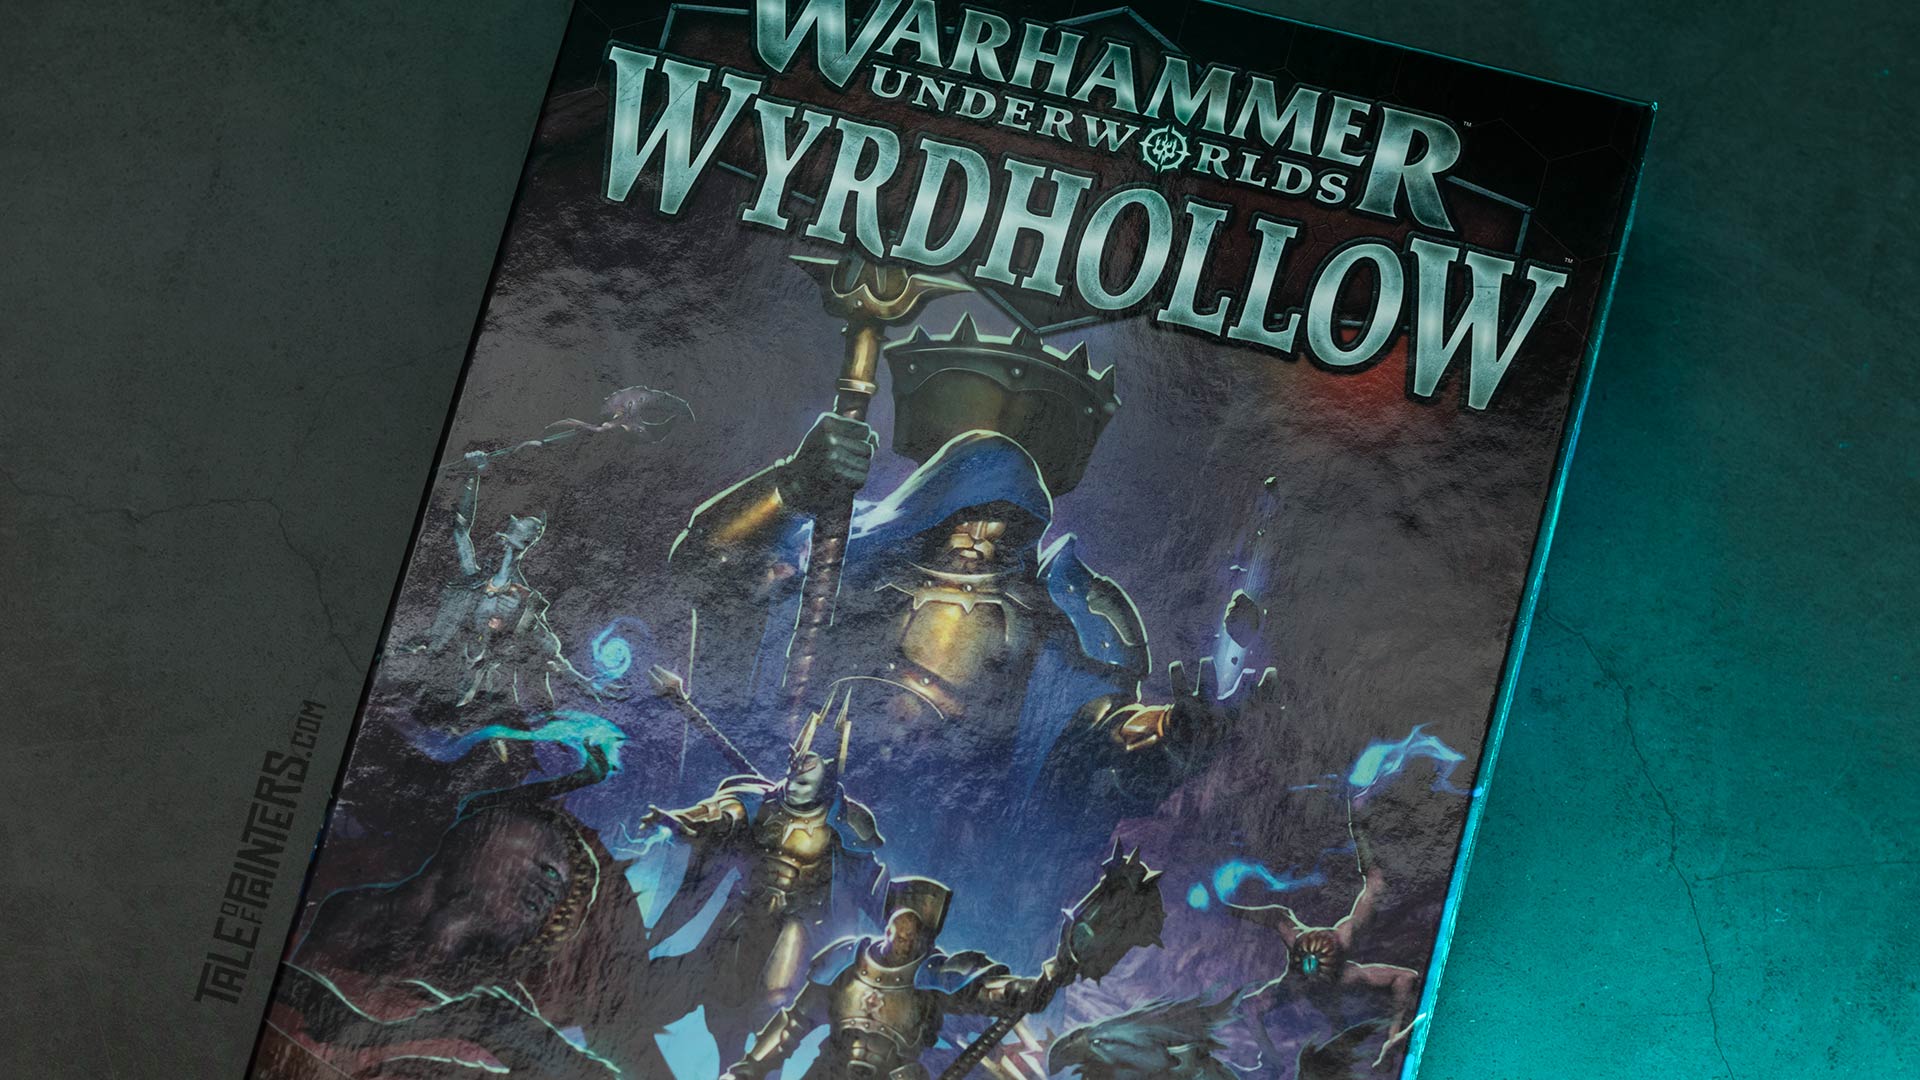 Warhammer Underworlds Wyrdhollow review and unboxing